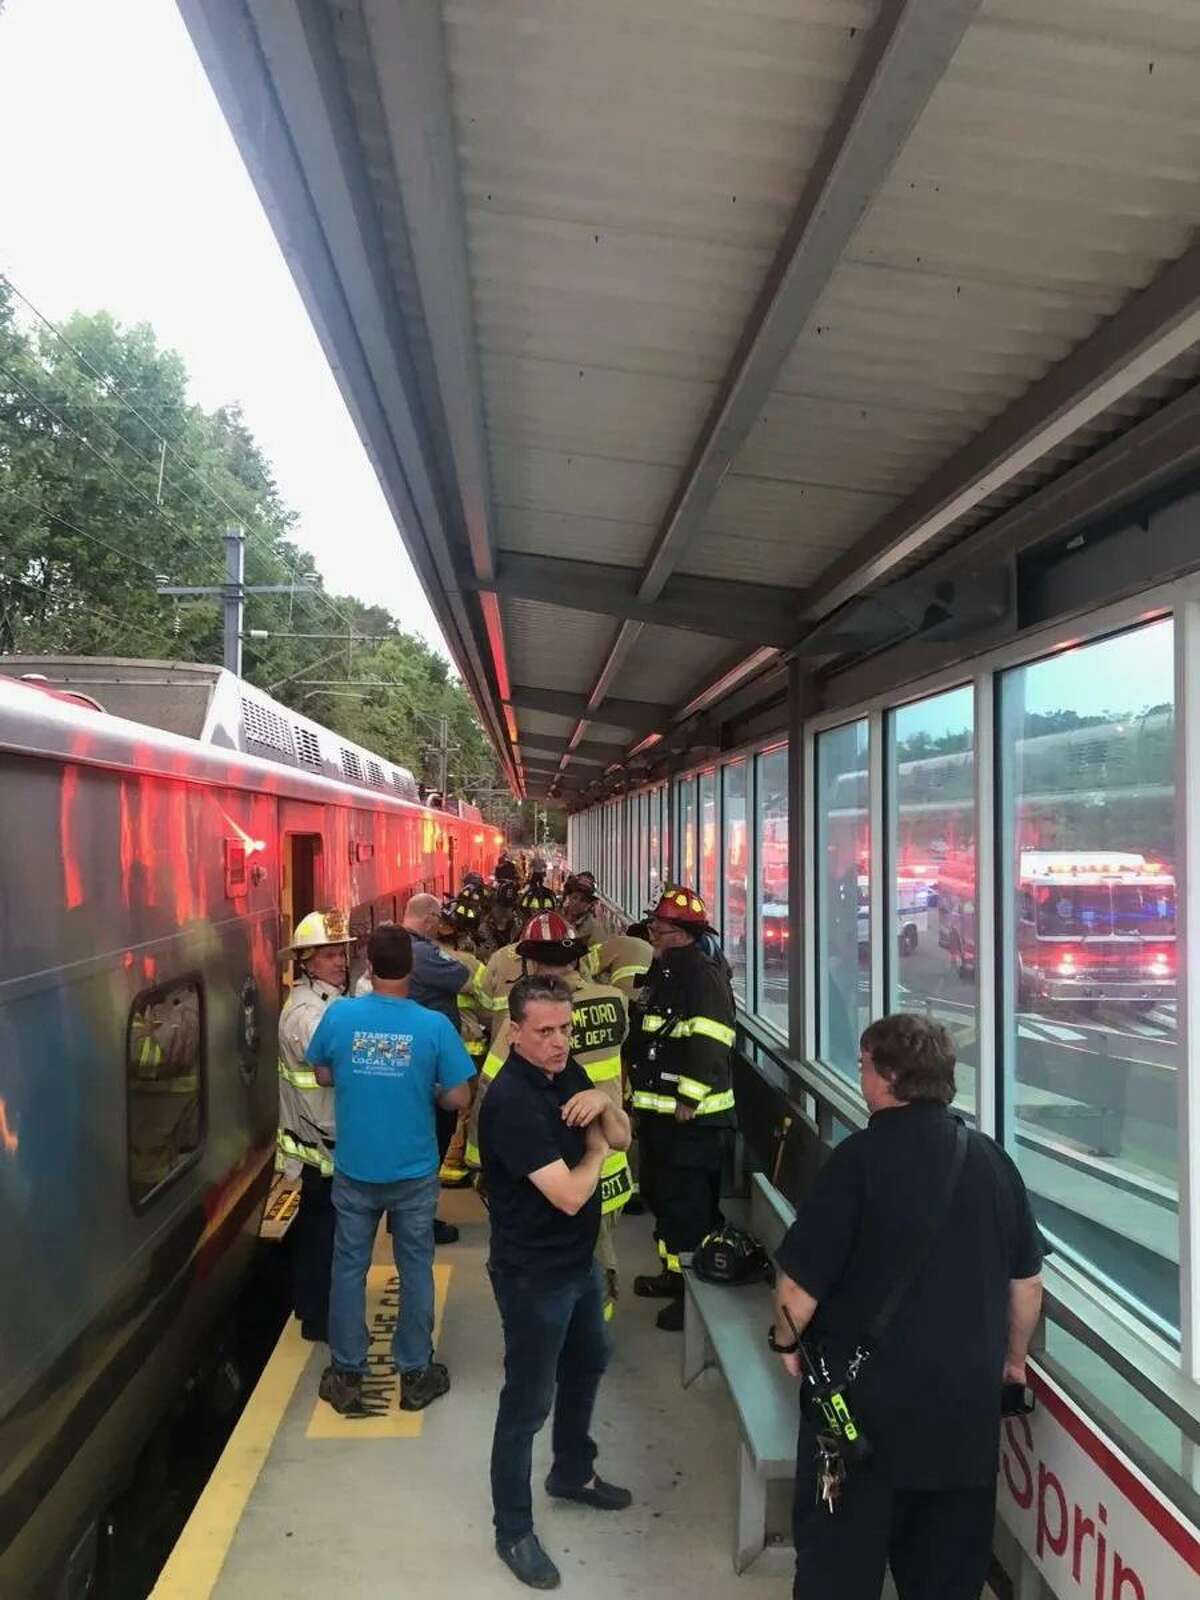 First responders rescued a woman who fell between the train and platform at the Springdale train station on Hope Street Tuesday night.